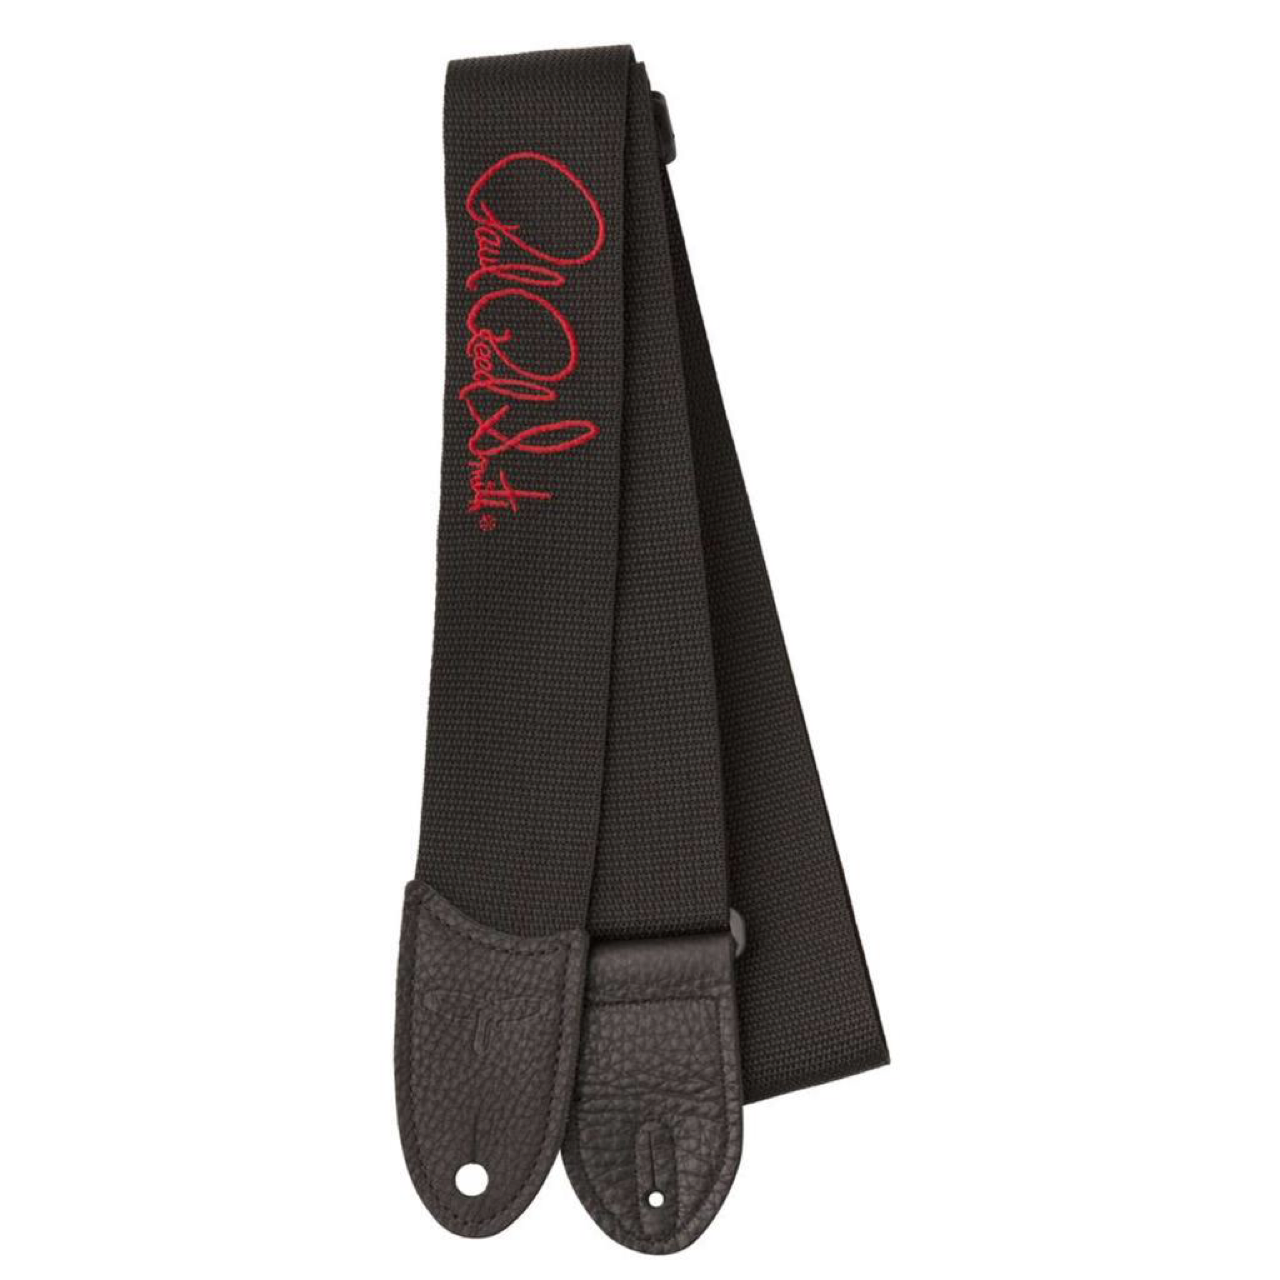  102509::012:  Poly Strap Signature Red/Black 